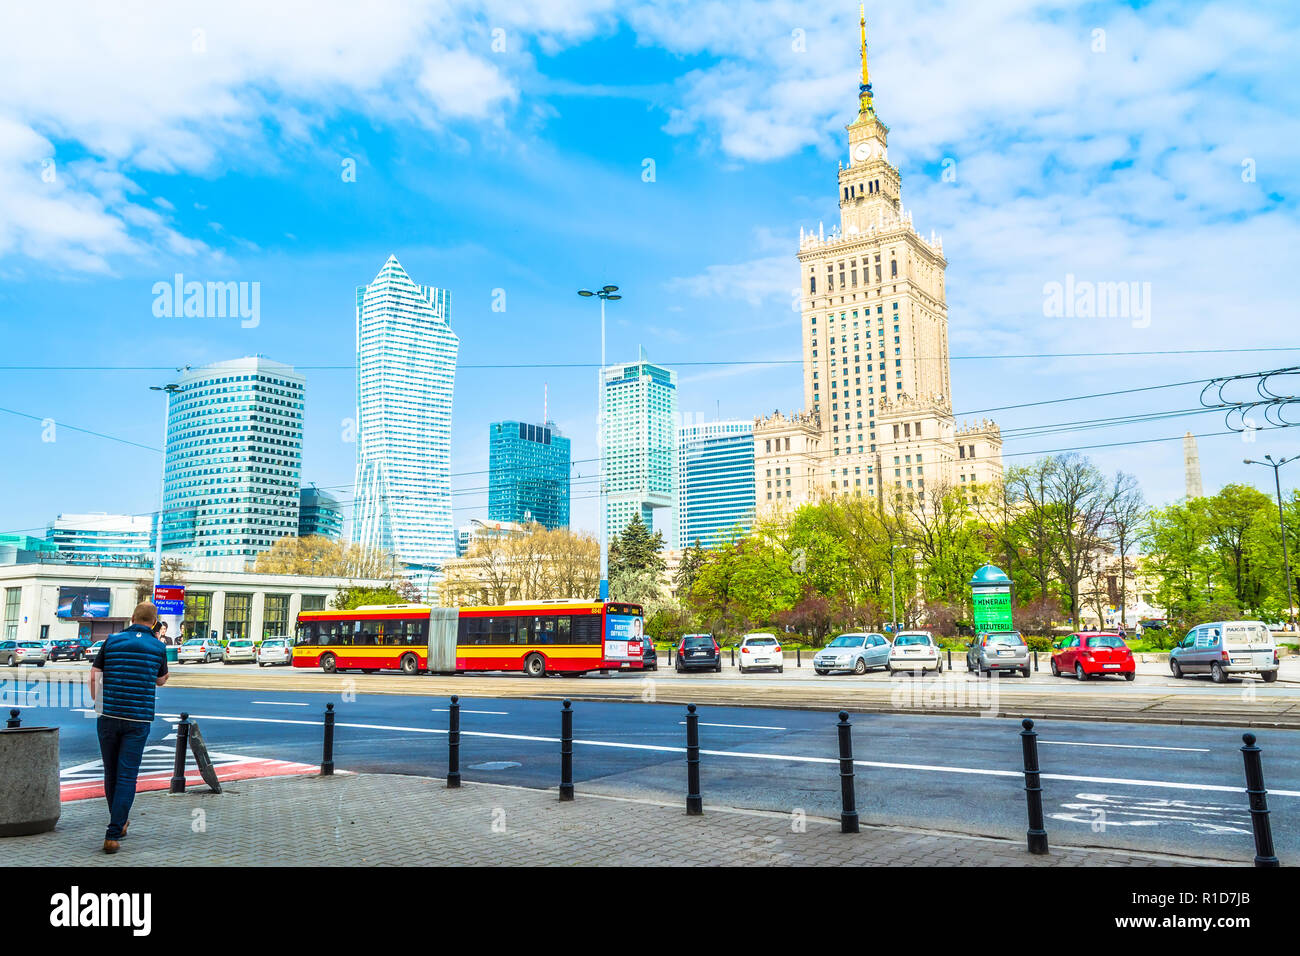 Palace of culture and science in warsaw hi-res stock photography and images  - Page 15 - Alamy